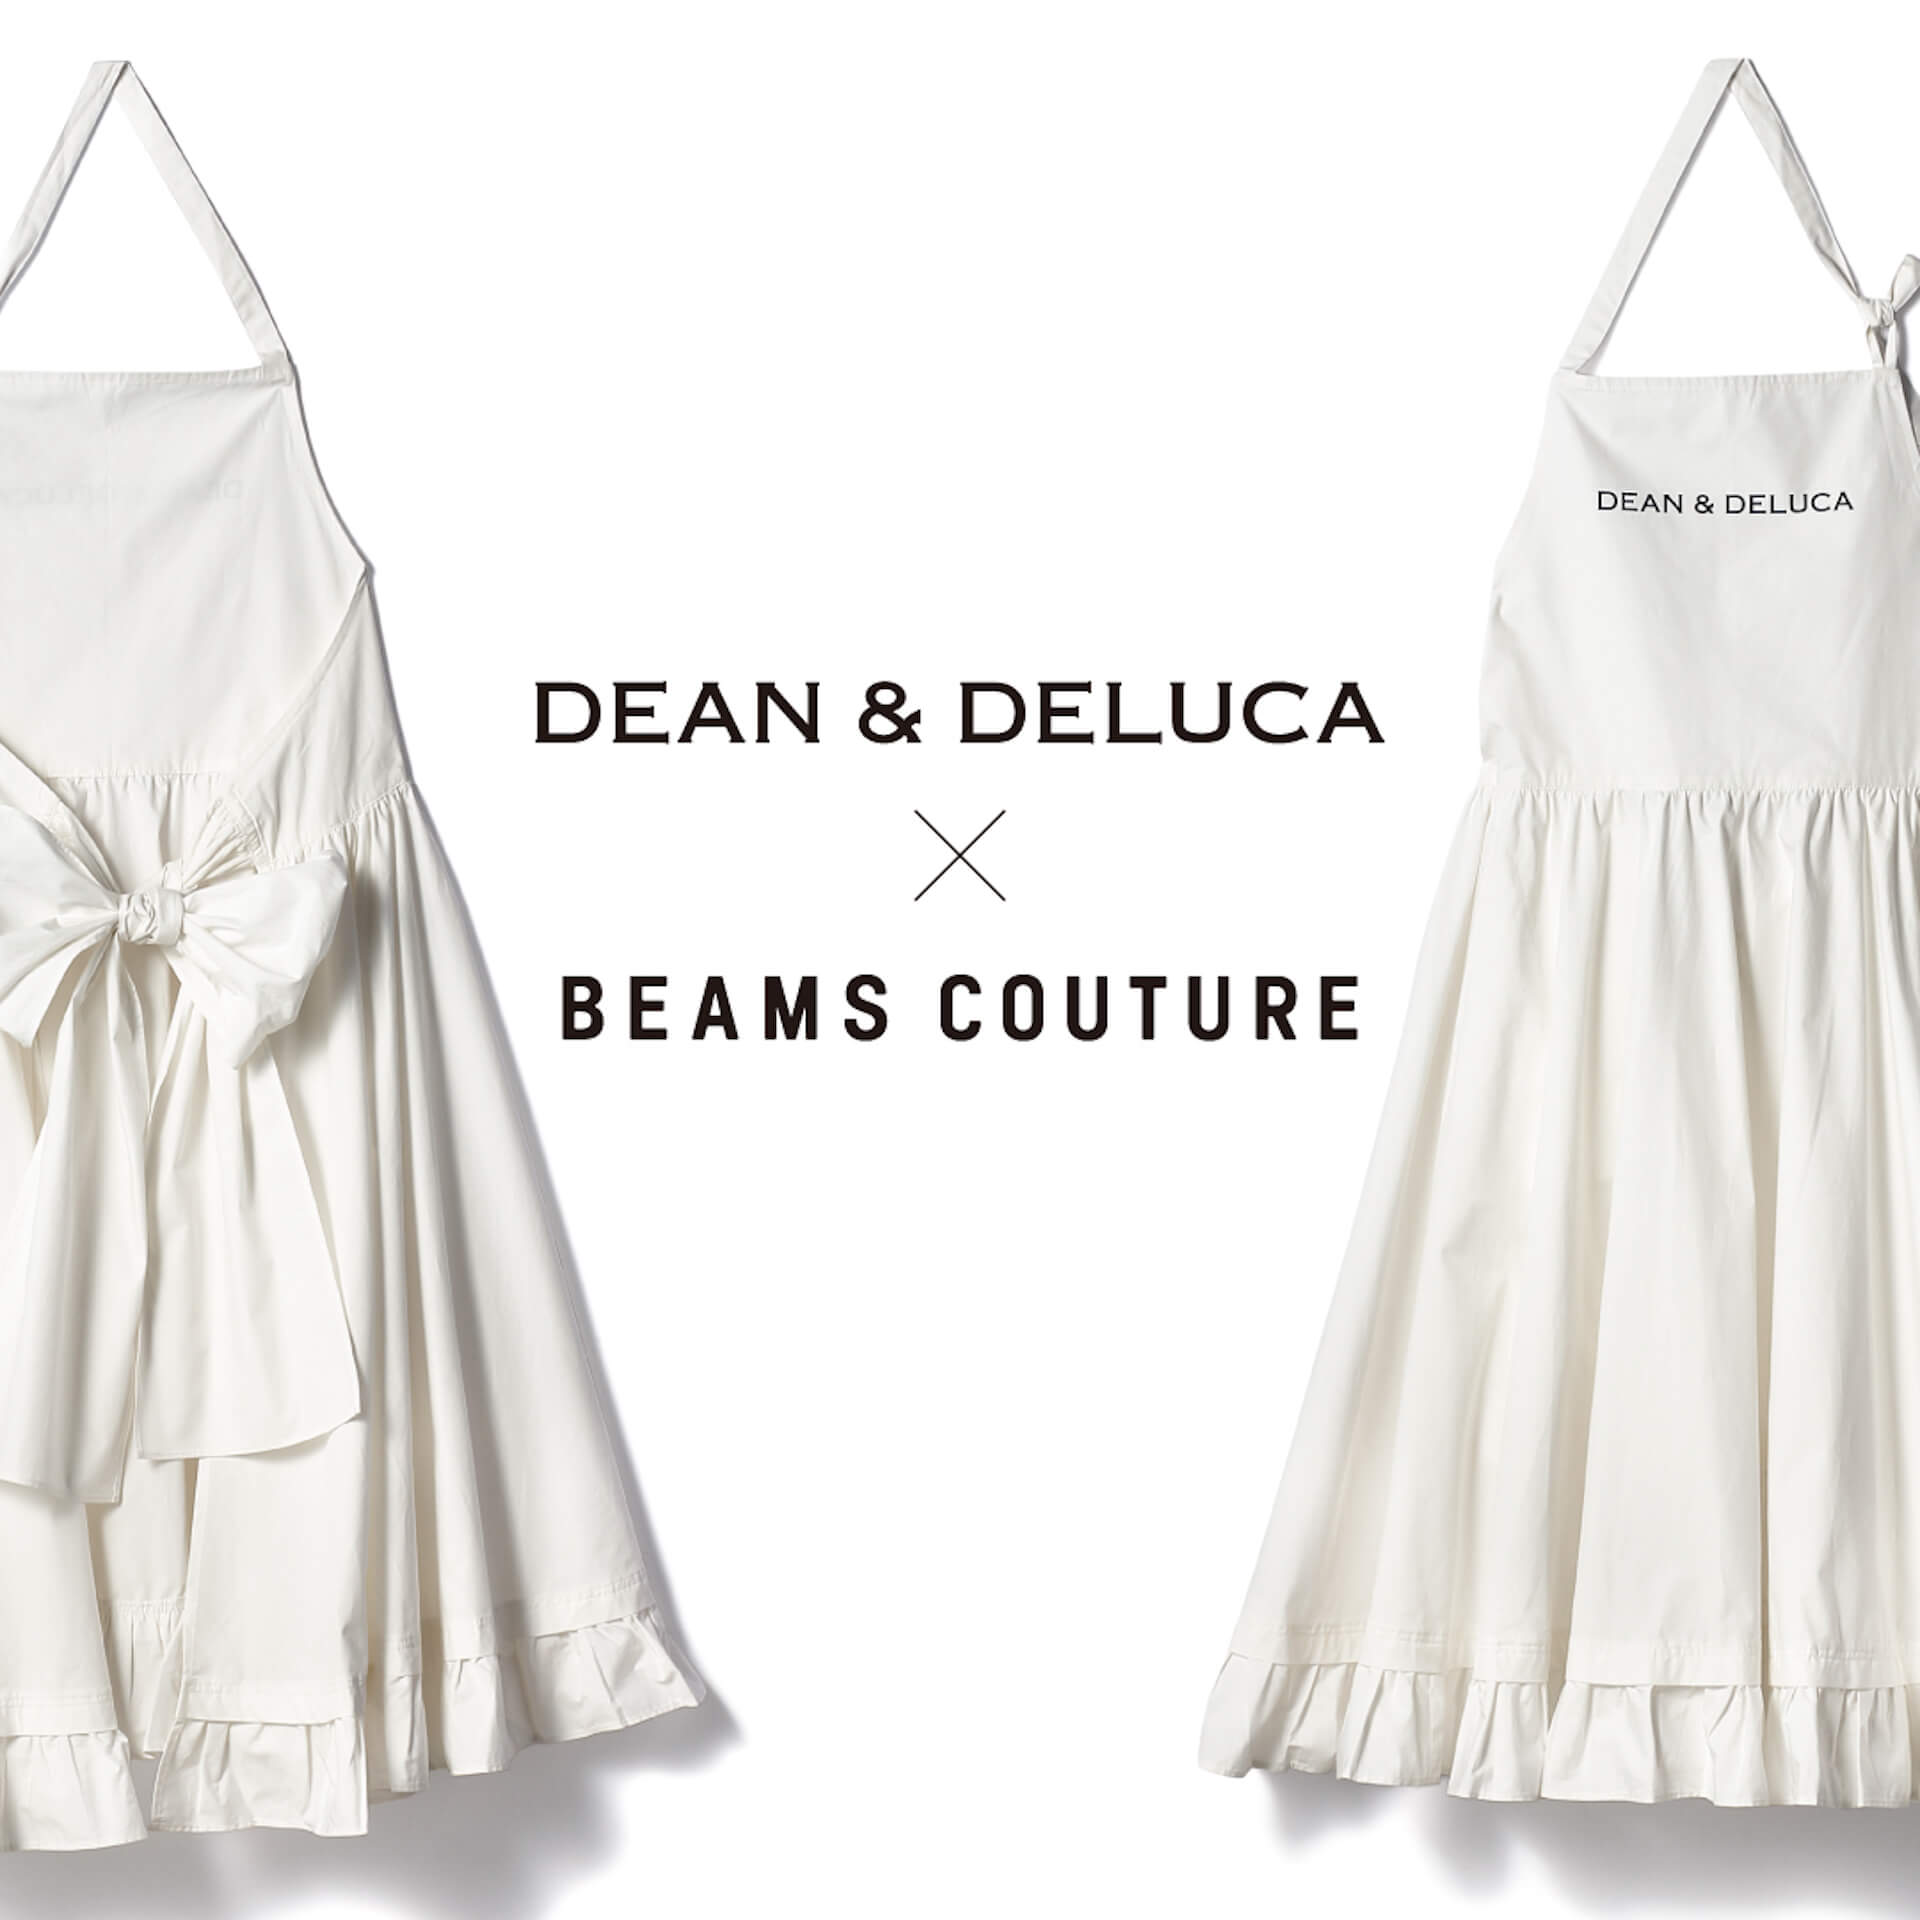 DEAN ＆ DELUCAとBEAMS COUTUREが初コラボ！母の日ギフトに最適なエプロンやカゴバッグなどが登場 life_220405_deananddeluca_beams_01